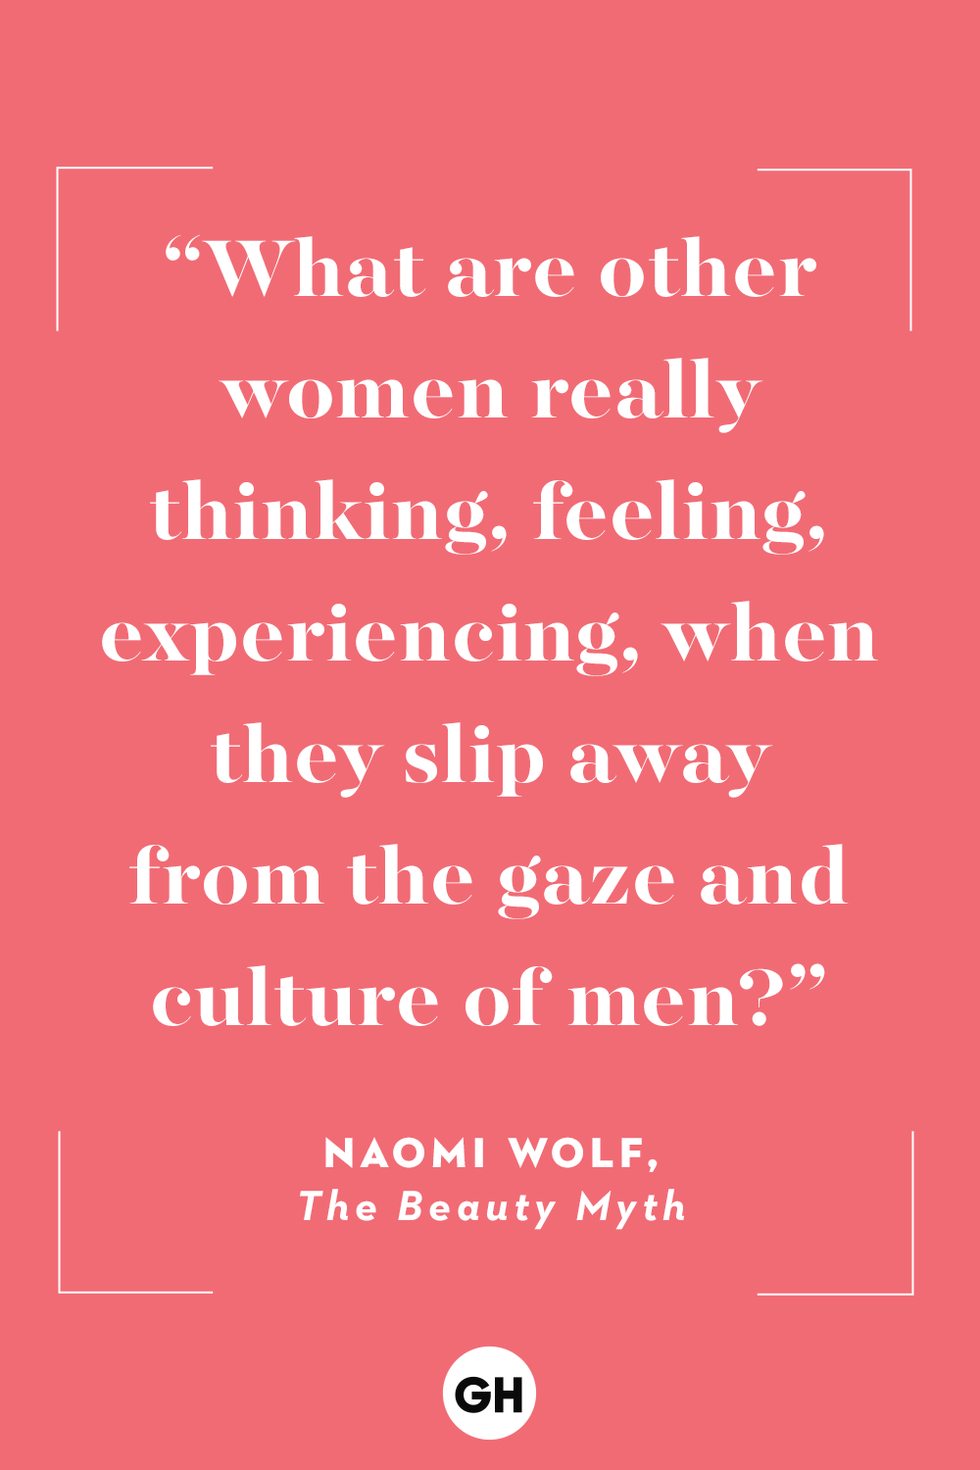 21 Best Inspirational Feminist Quotes of All Time - Empowering Women's  Quotes